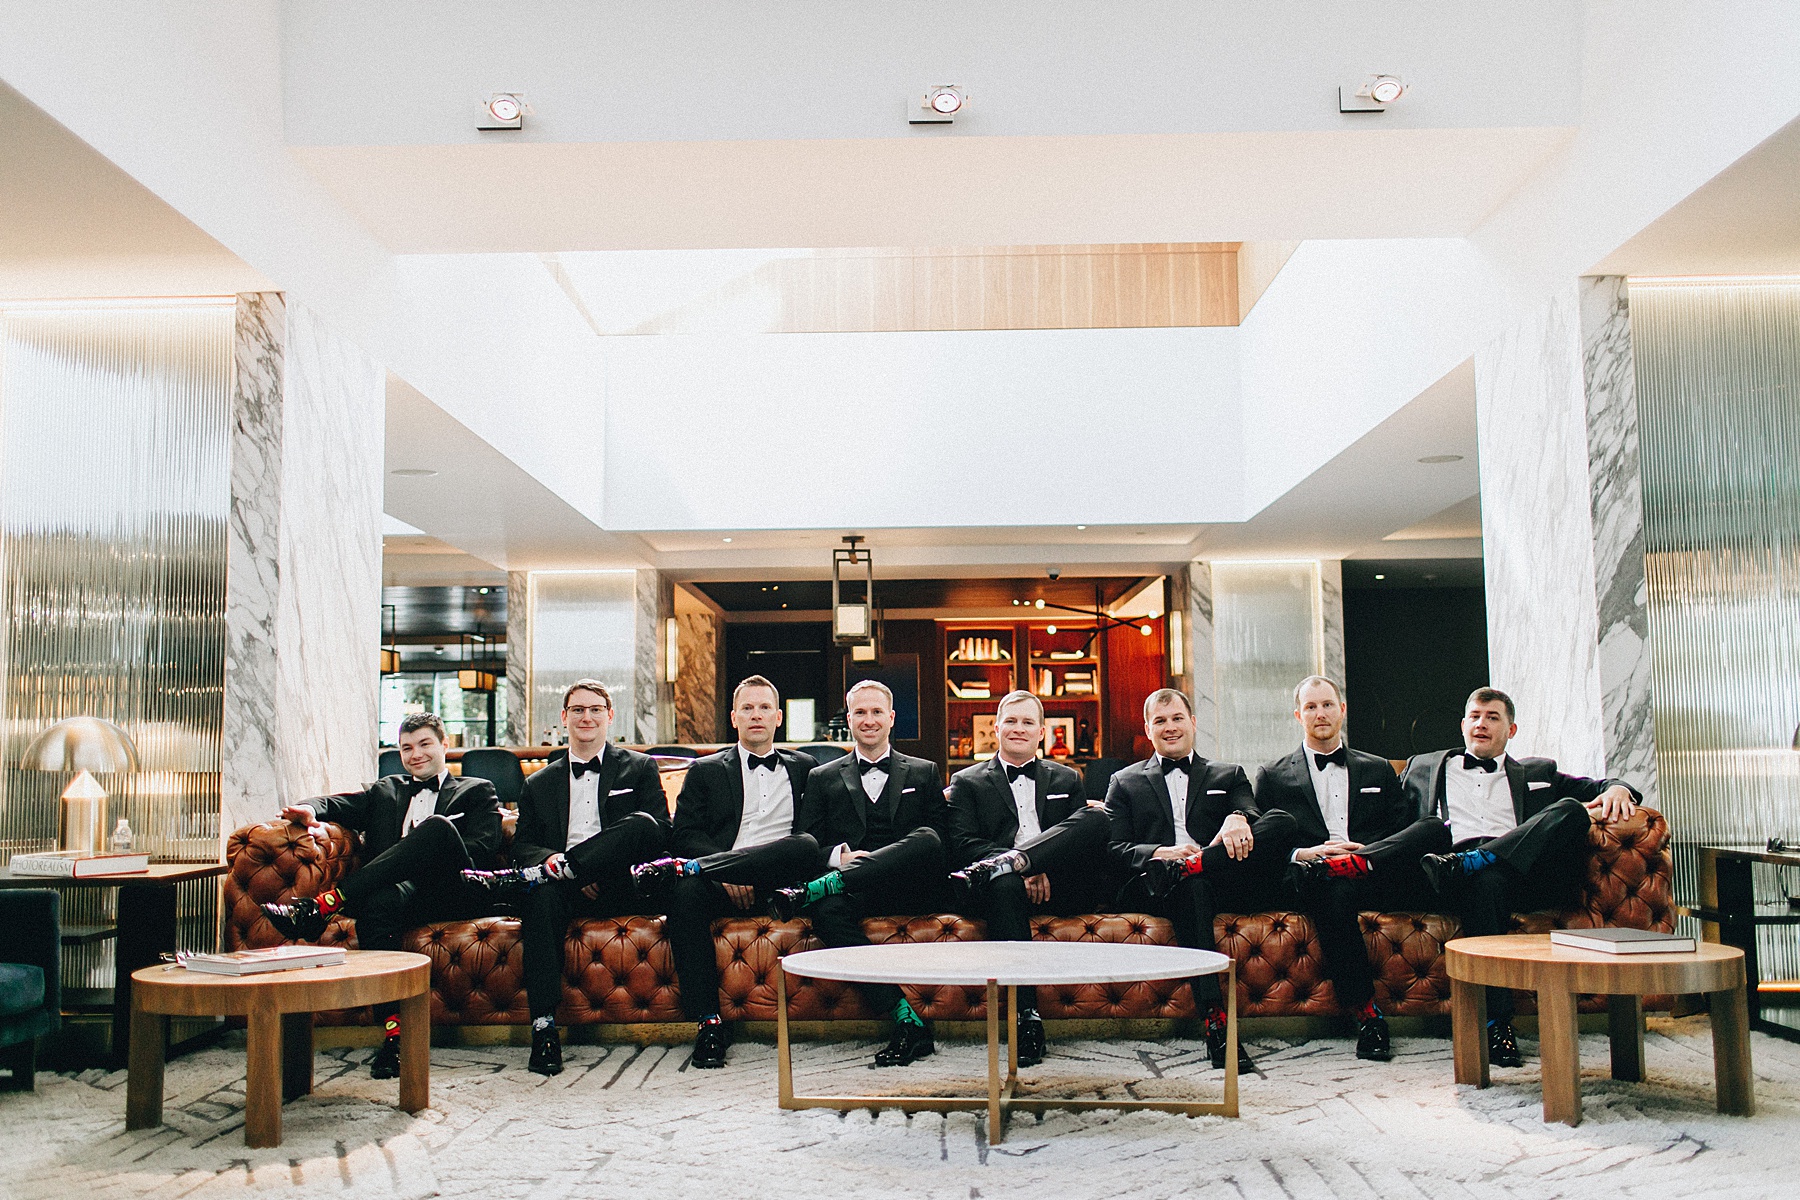 Group picture of the Groom and his Groomsmen in the Four Seasons hotel